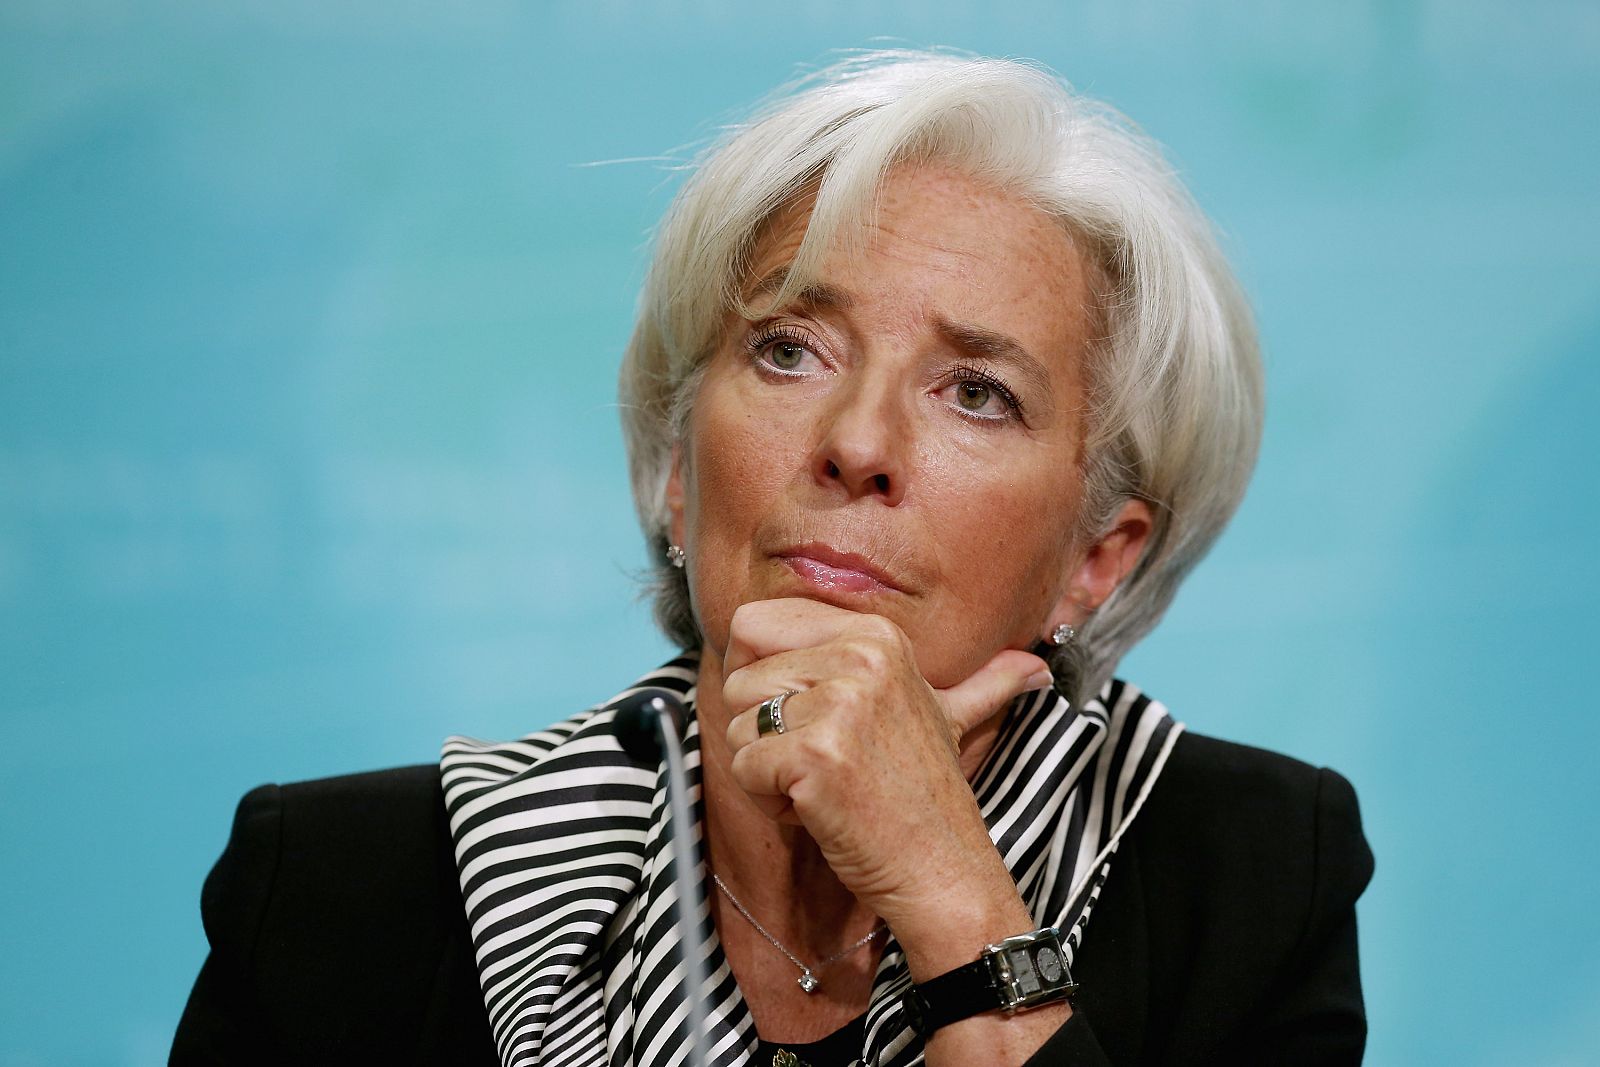 IMF Head Christine Lagarde Holds News Conf. On Economic Policy Priorities